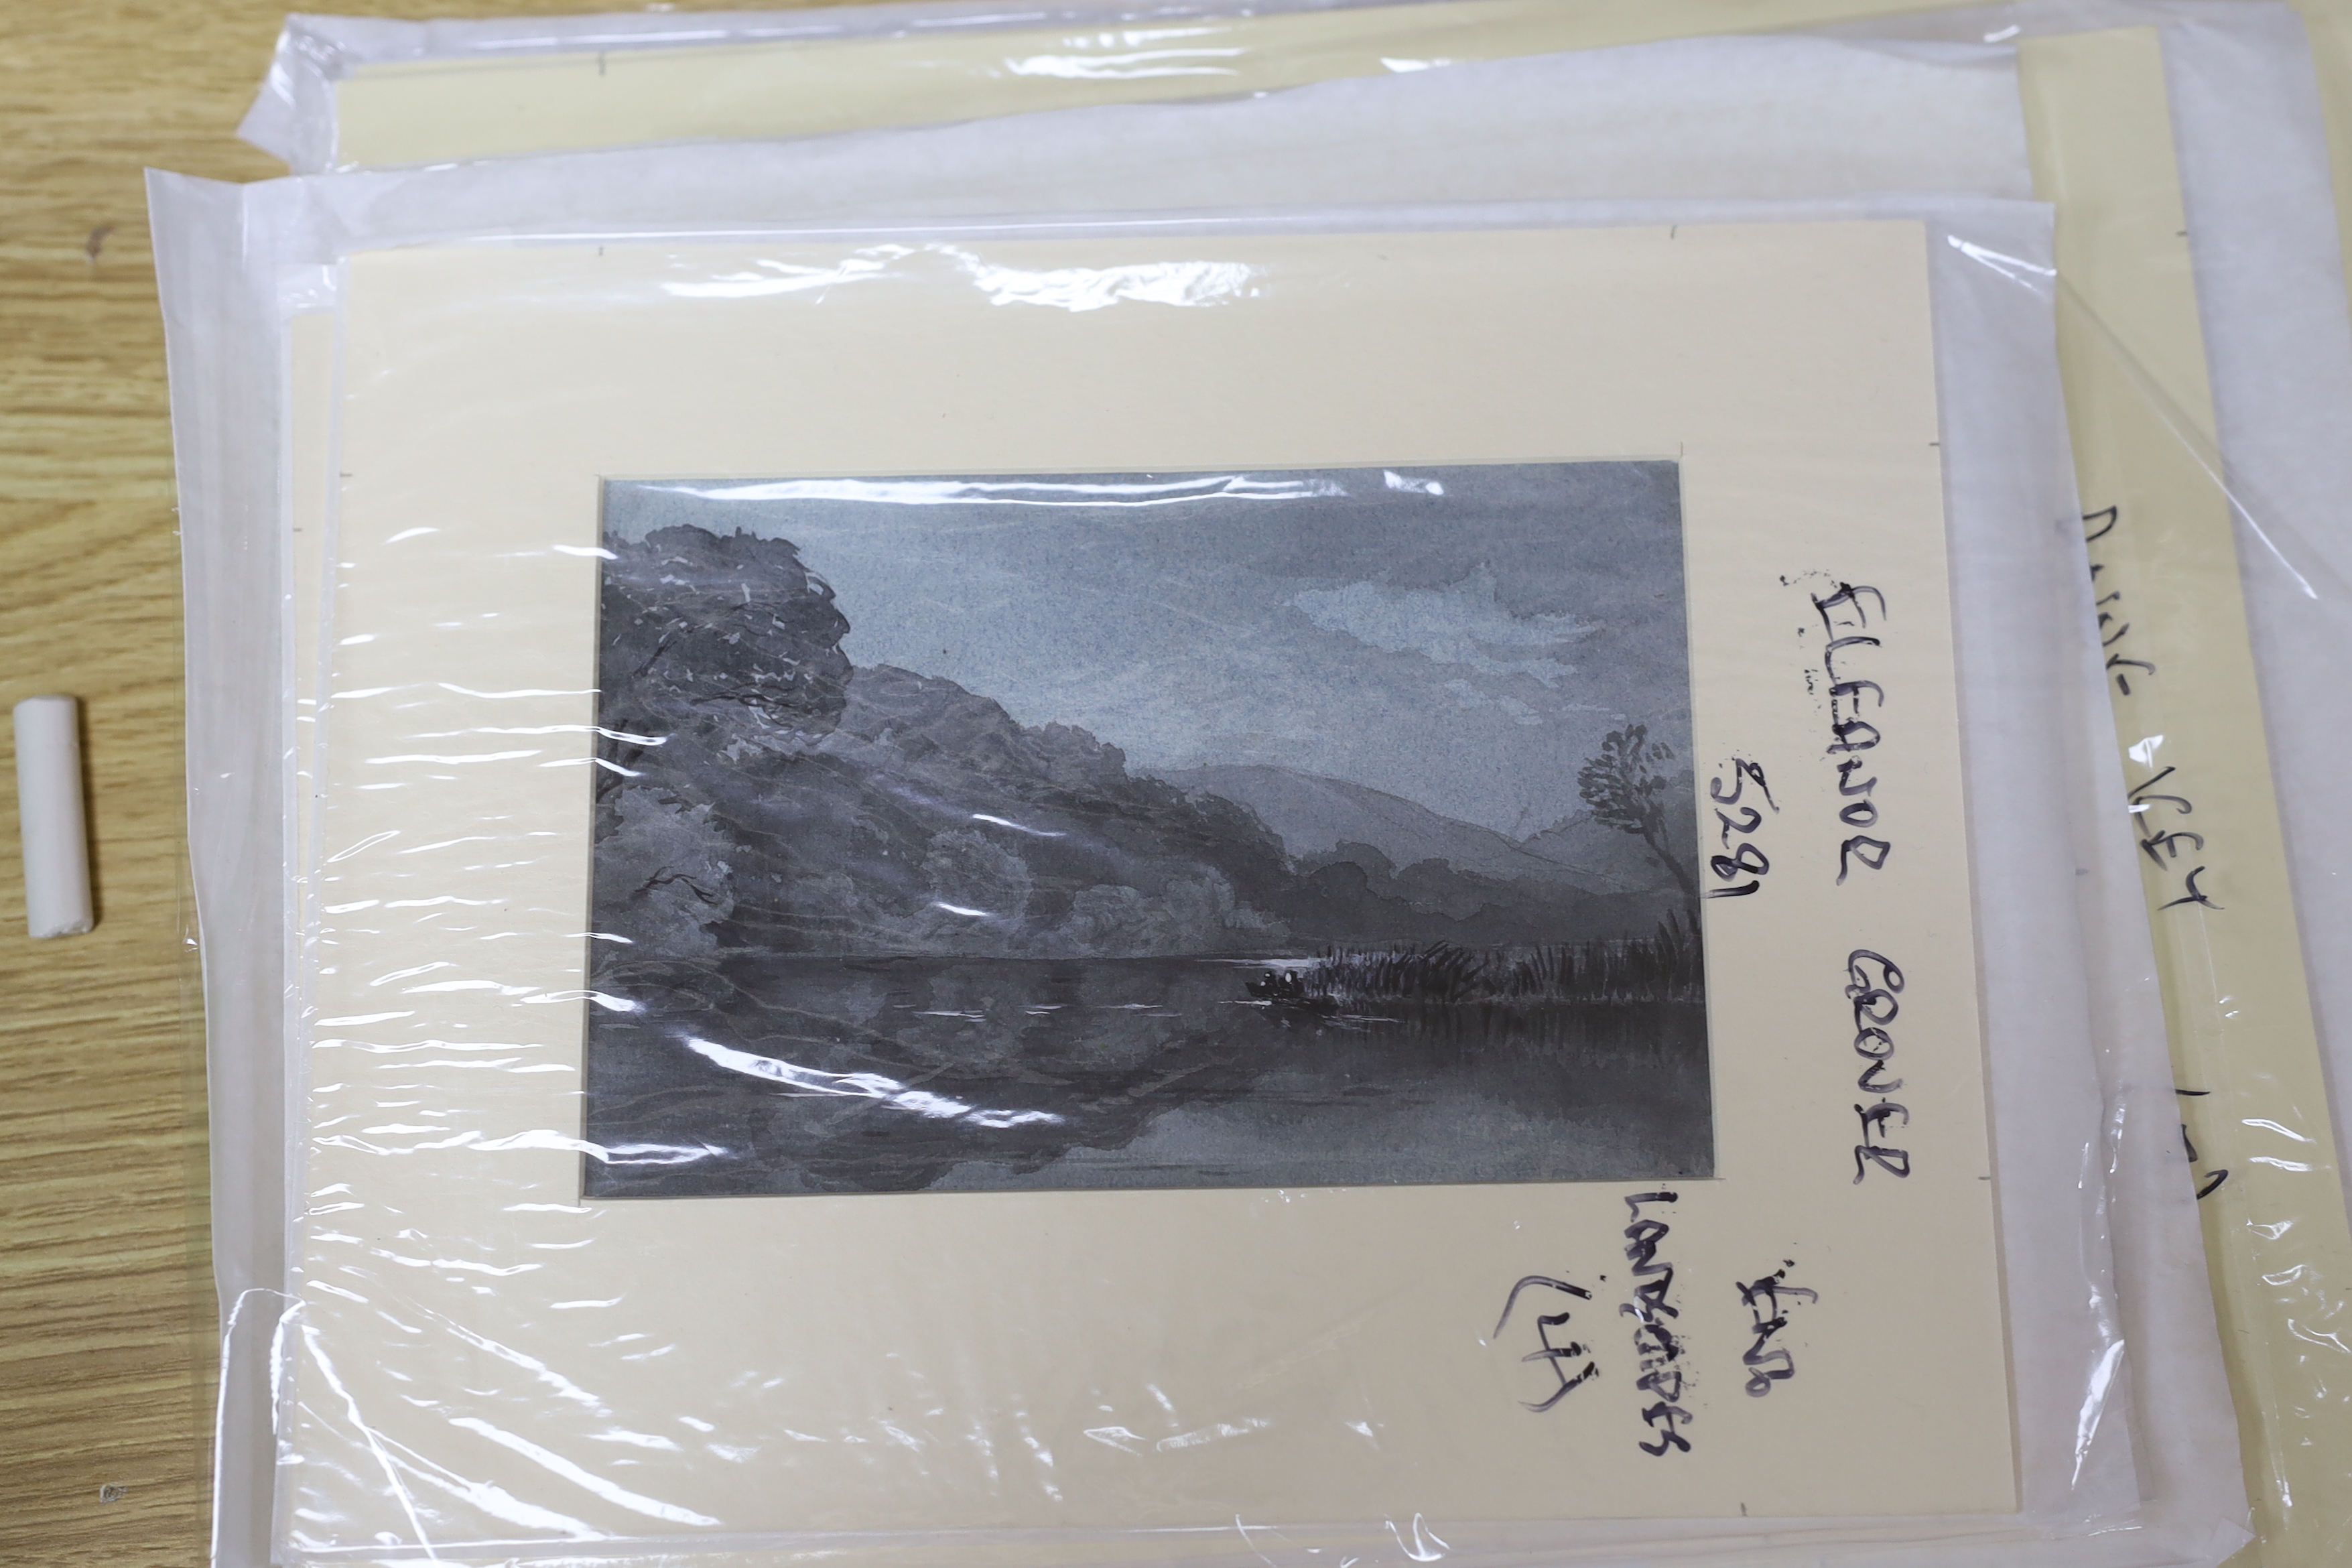 Collection of 19th century watercolours by Anne Key taken from pages of an album, including landscapes, together with four monochrome landscapes by Eleanor Grover and a sketchbook by Eleanor Wilson, Welsh views, largest